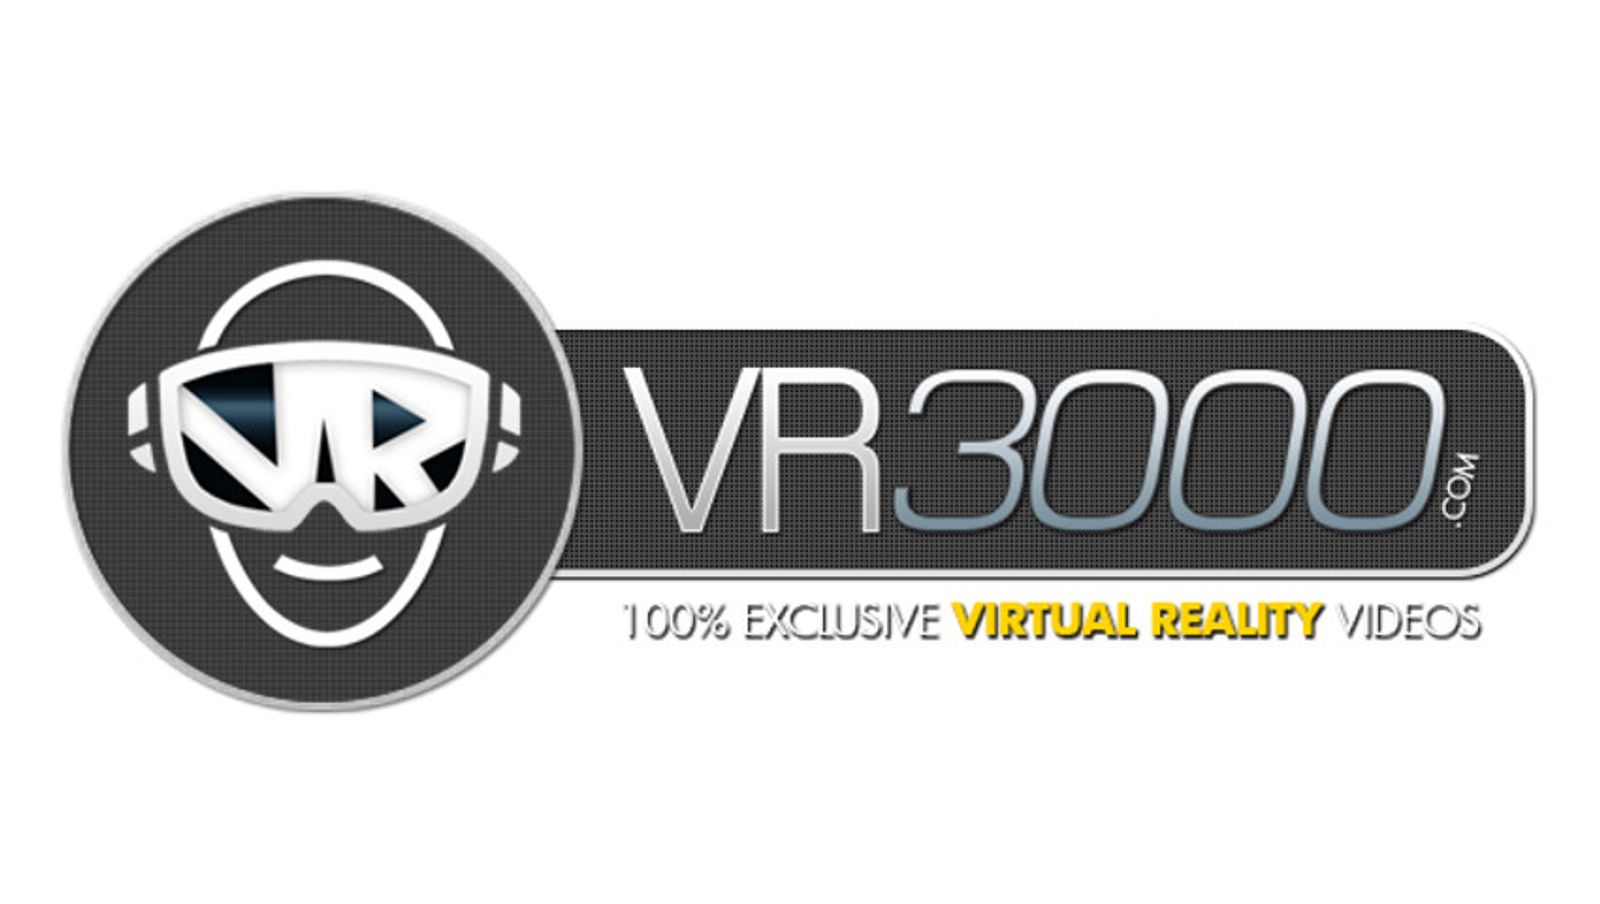  Webmaster Central, VR3000.com Join Forces With Kiiroo